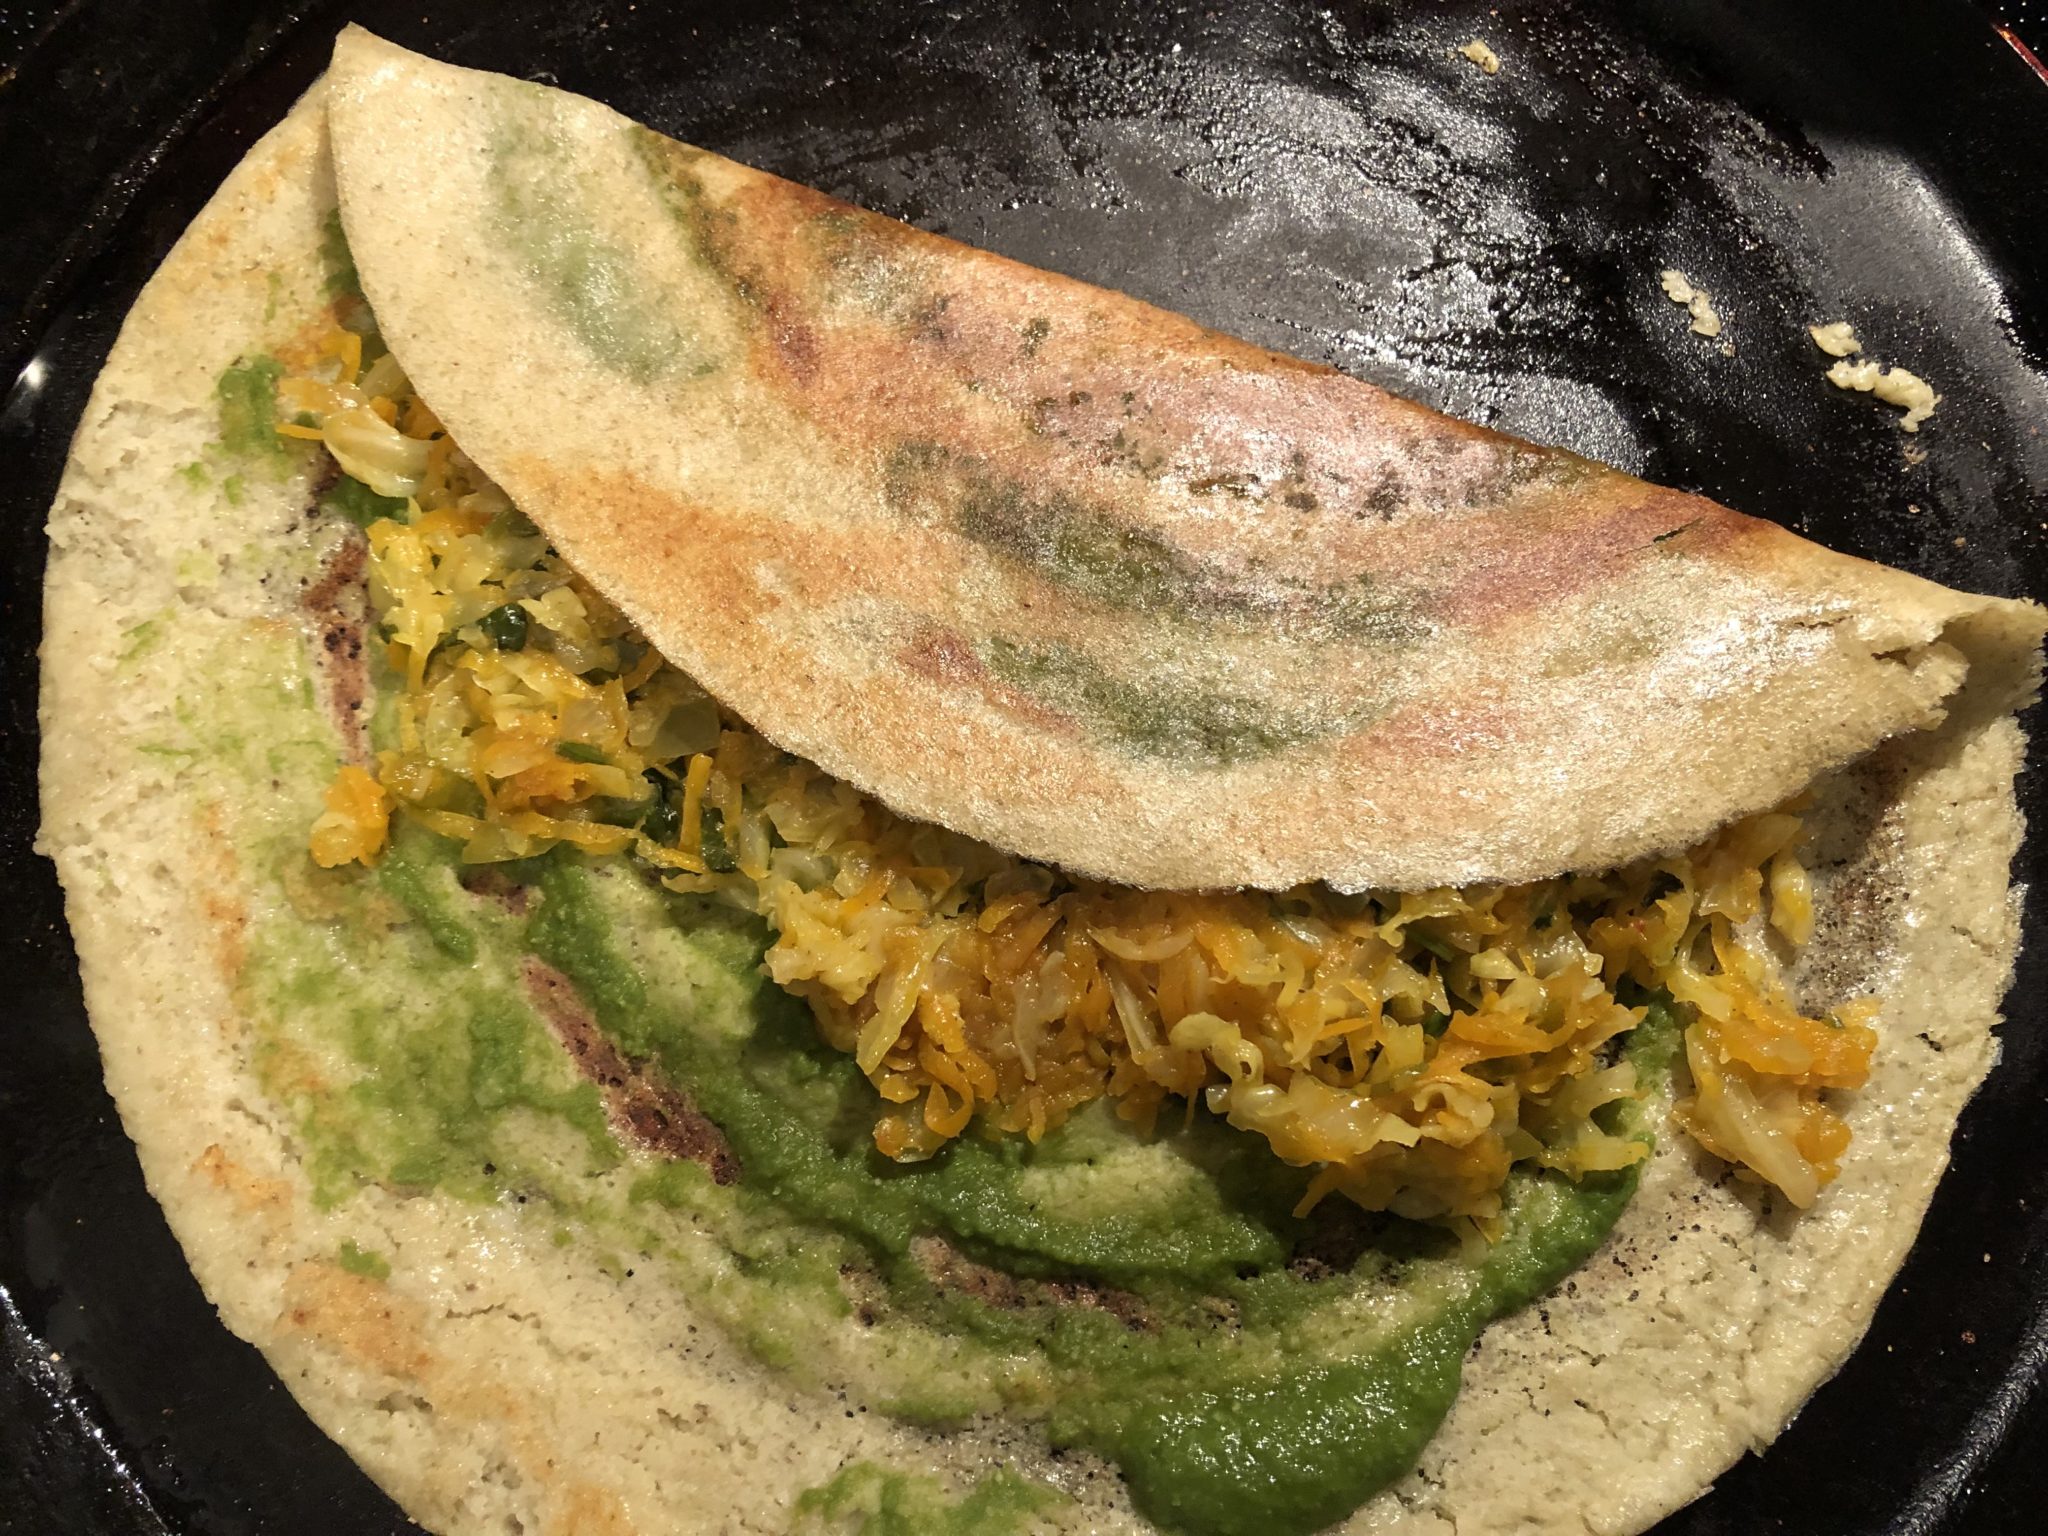 Moong Dal Brown Rice Dosa WIth Vegetable Stuffing